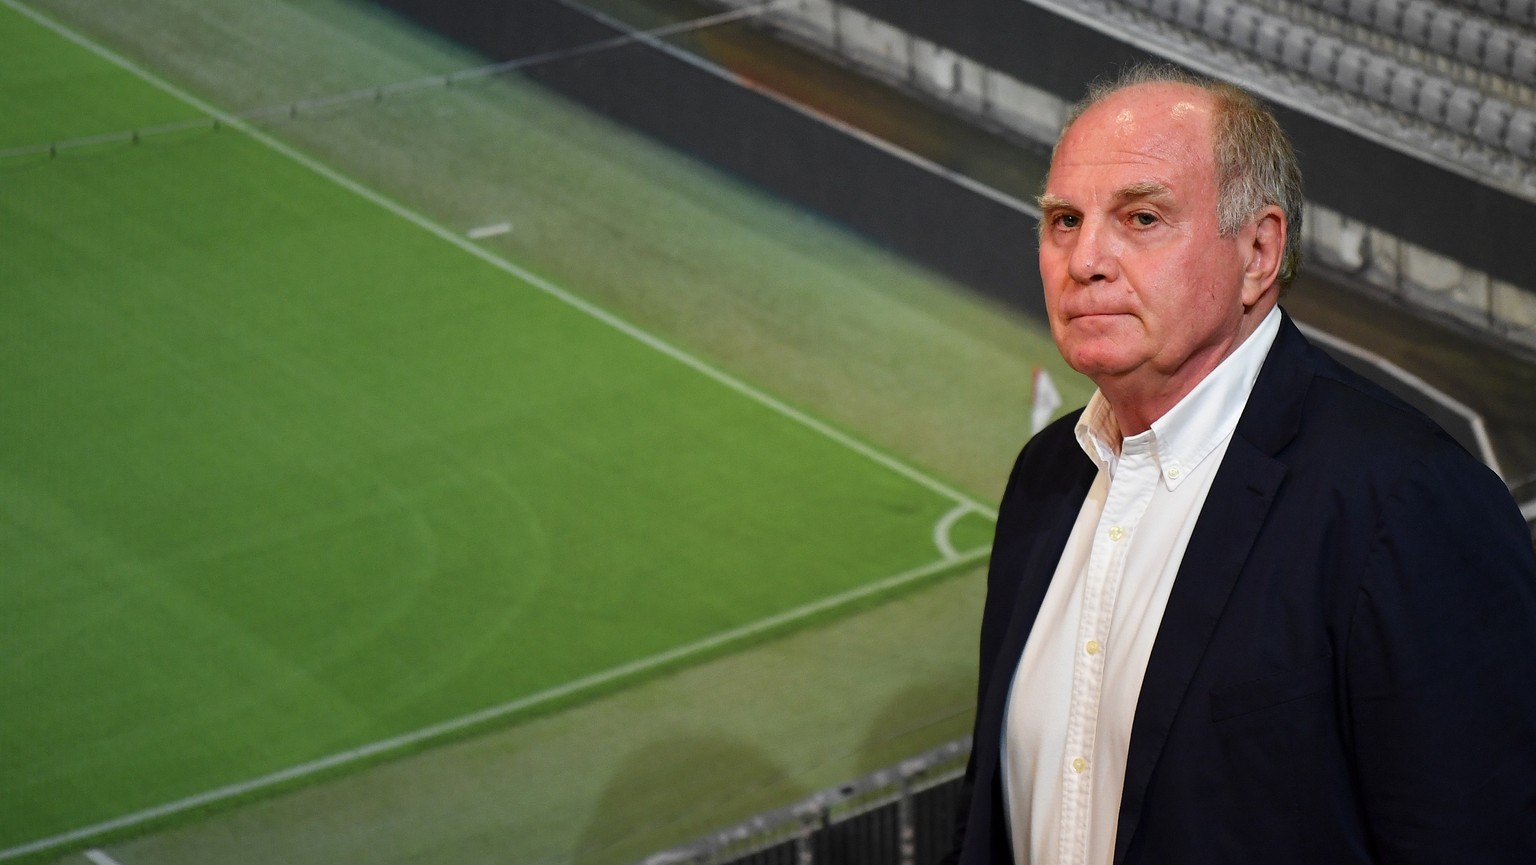 epa07803787 Bayern Munich&#039;s president Uli Hoeness arrives for a press conference at the Allianz Arena in Munich, Germany, 30 August 2019. Hoeness announced he will not be available for another te ...